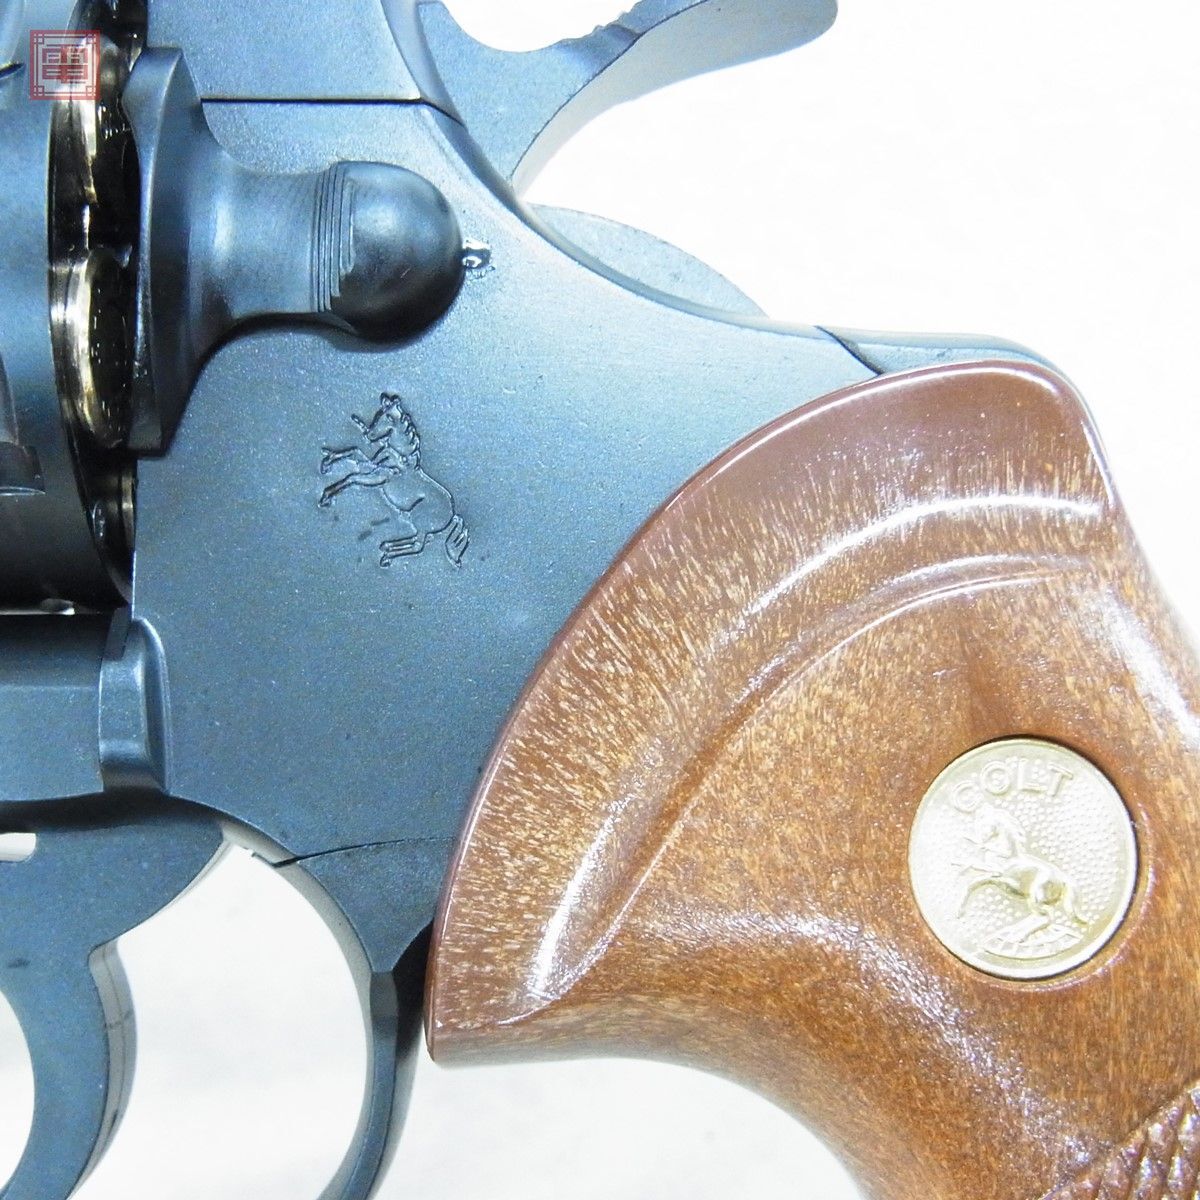 tanaka gas revolver Colt python 4 -inch HW heavy weight toR-model present condition goods [20